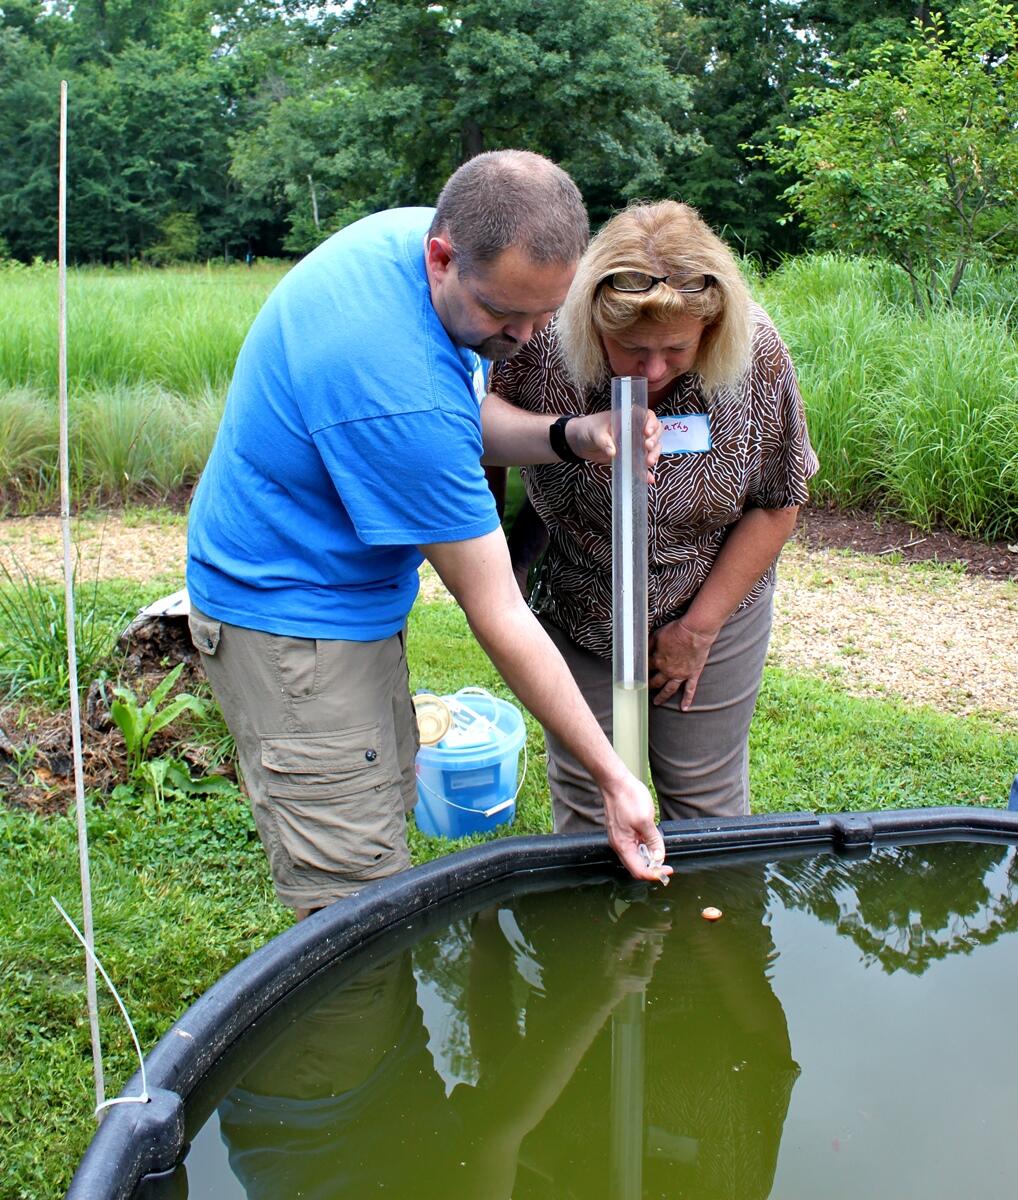 This past summer’s teacher workshop participants measuring water clarity of the sunny mesocosm at the VCU Rice Center using a Secchi Disk. Image Courtesy of Lindsey Koren/VCU.